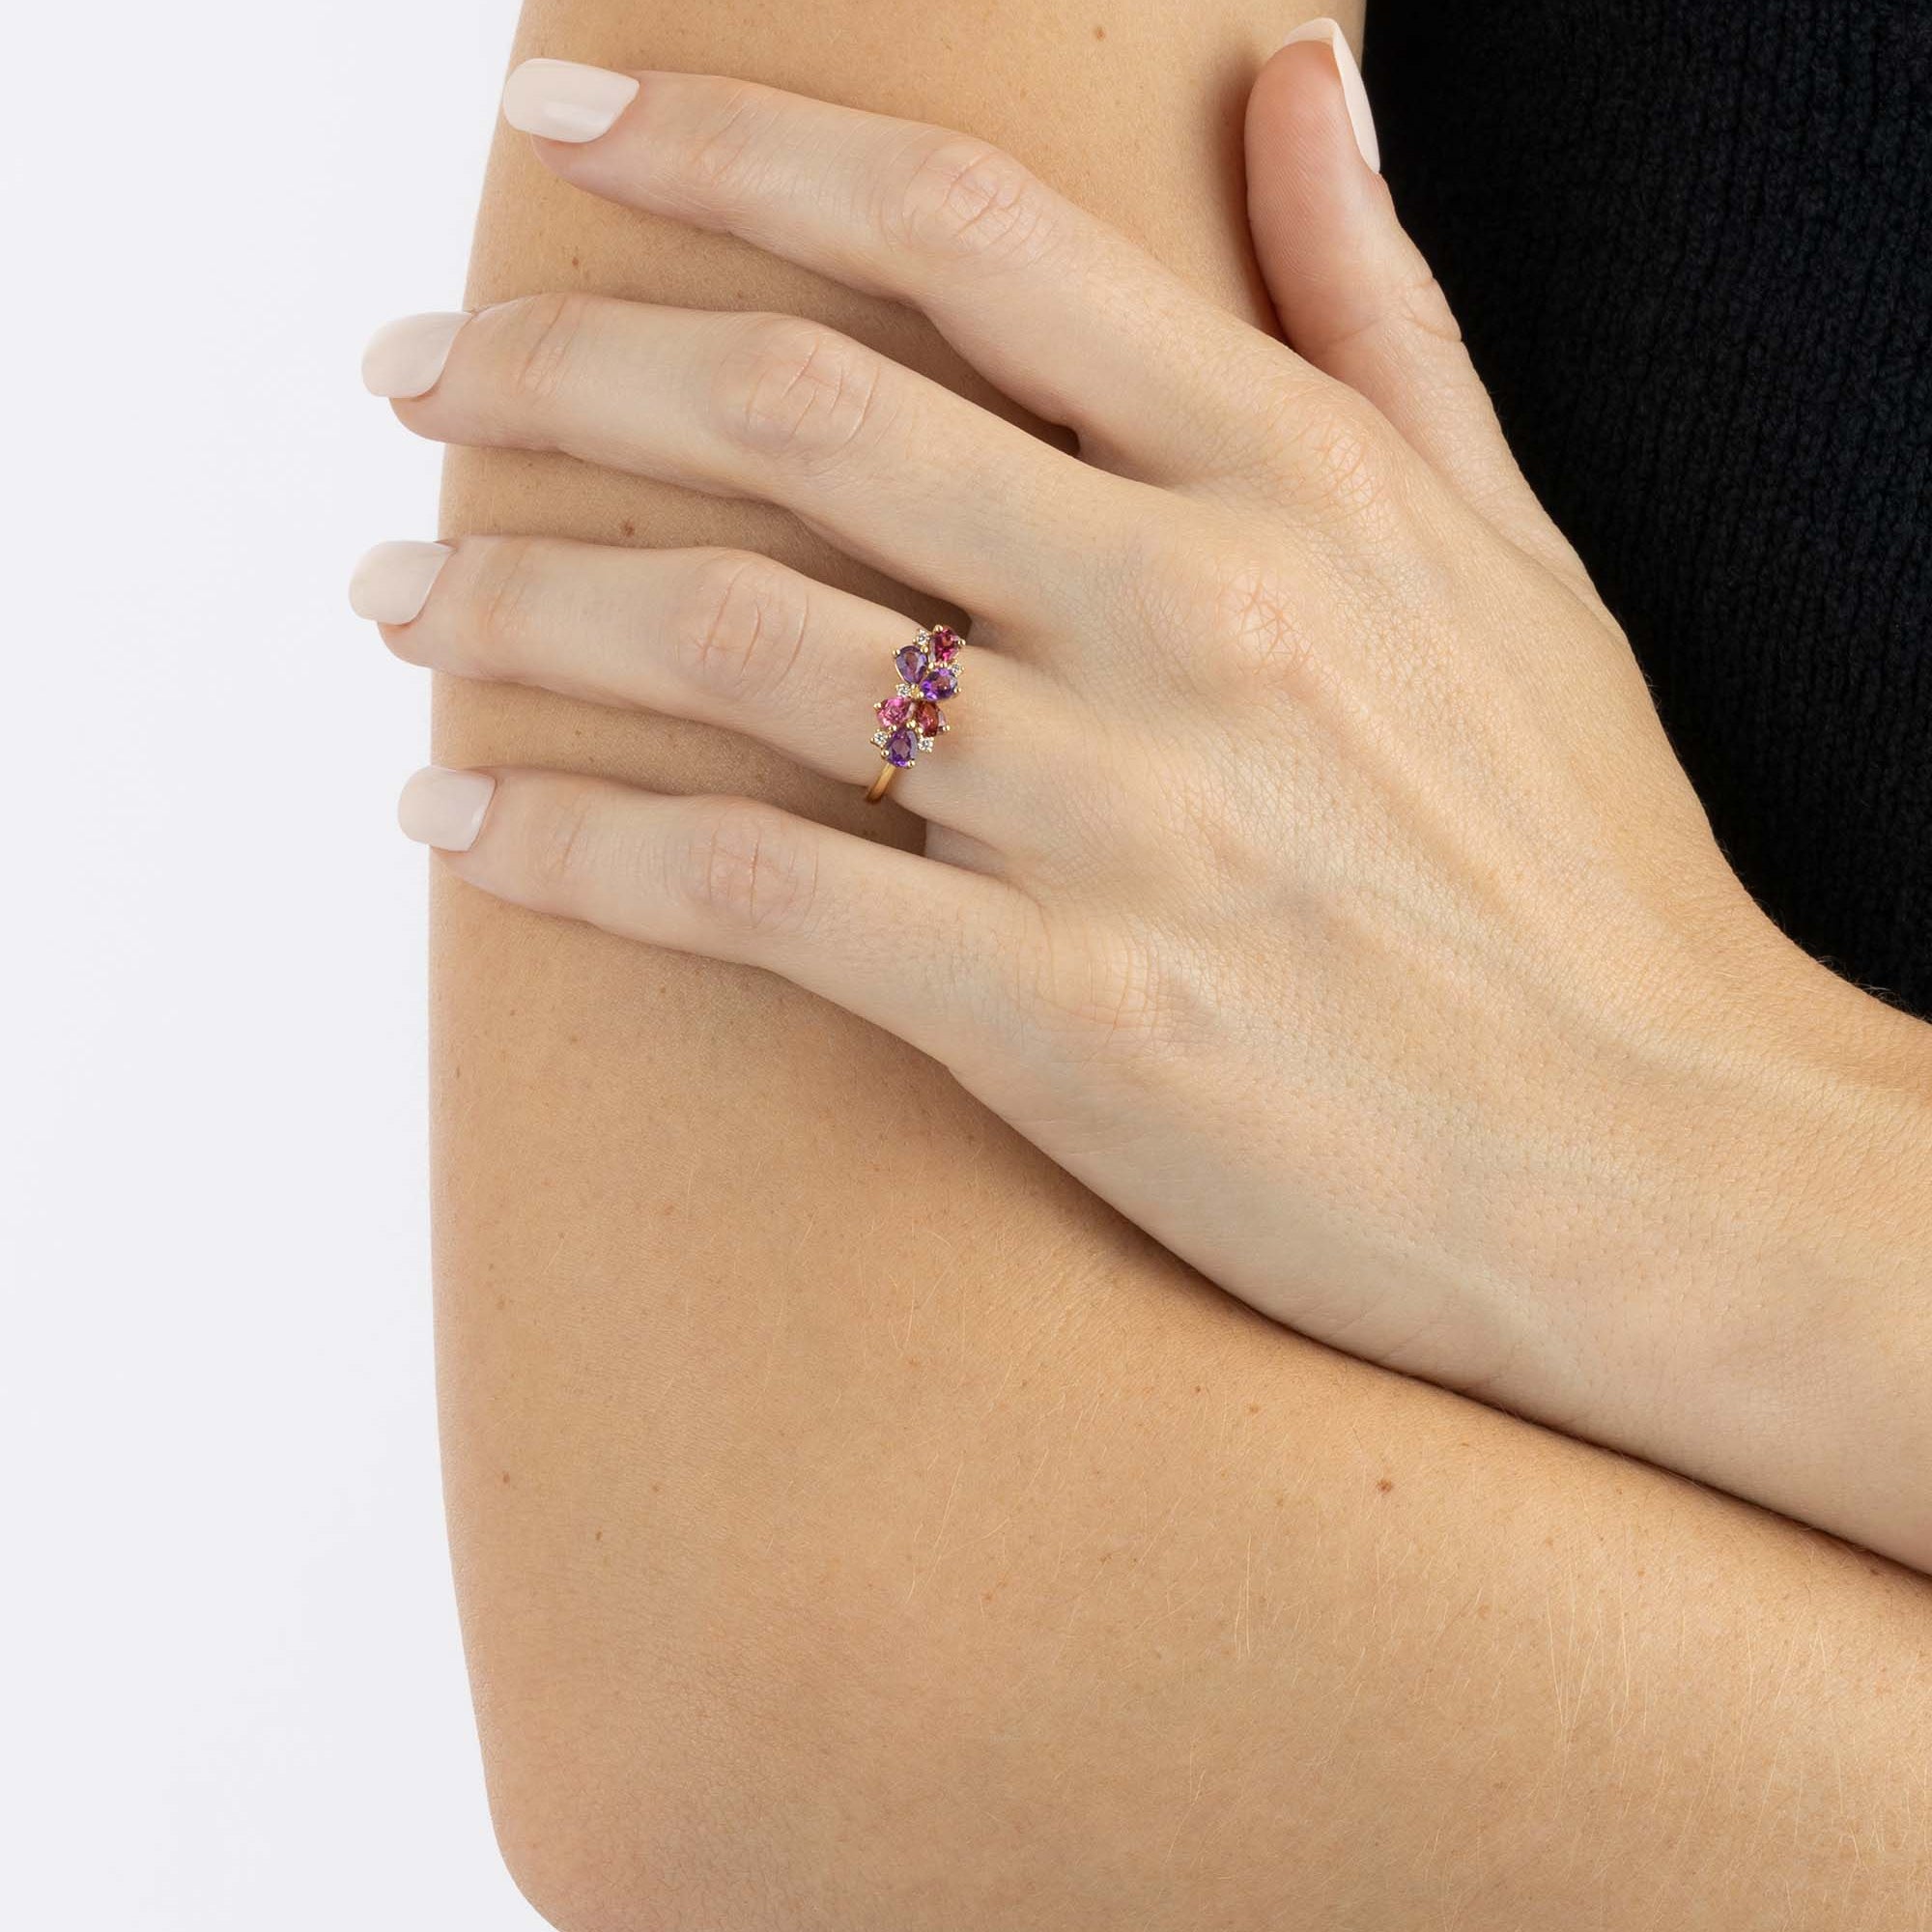 Yellow Gold Ring with Pink Tourmaline and Sapphire, Amethyst, and small Diamonds, Small - Model shot